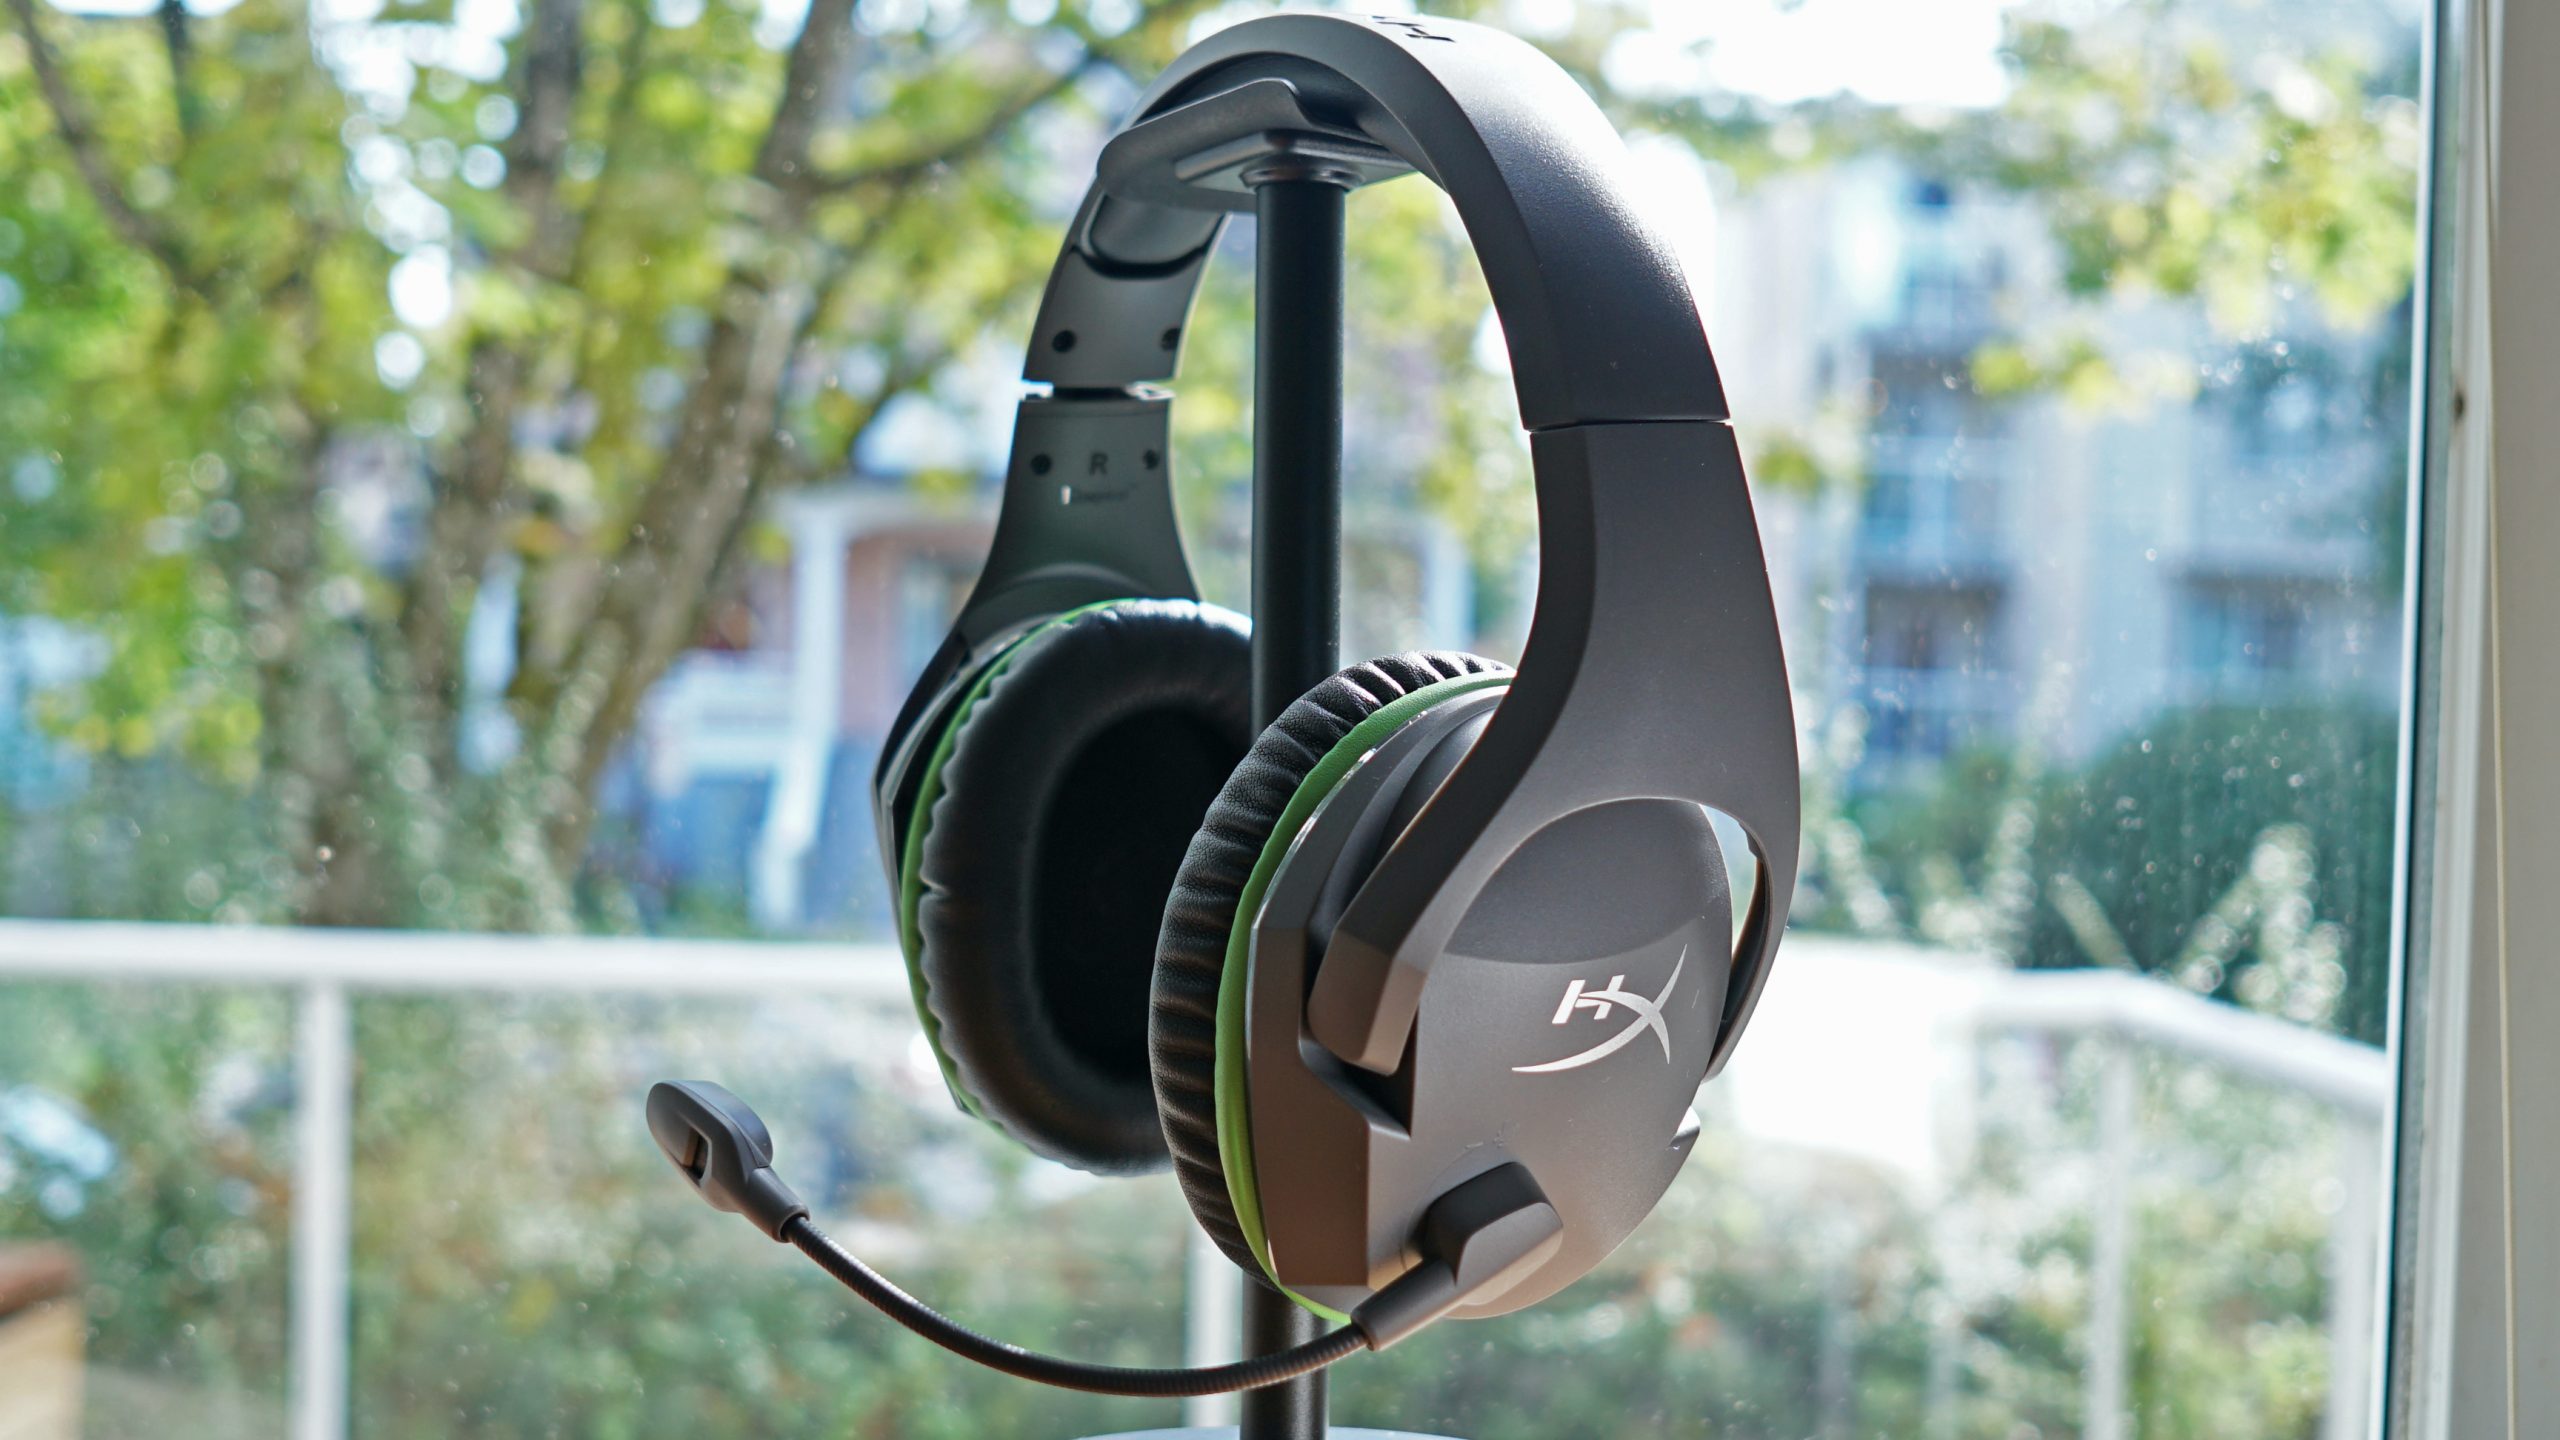 Get this HyperX gaming headset for only $17 — over half off MSRP